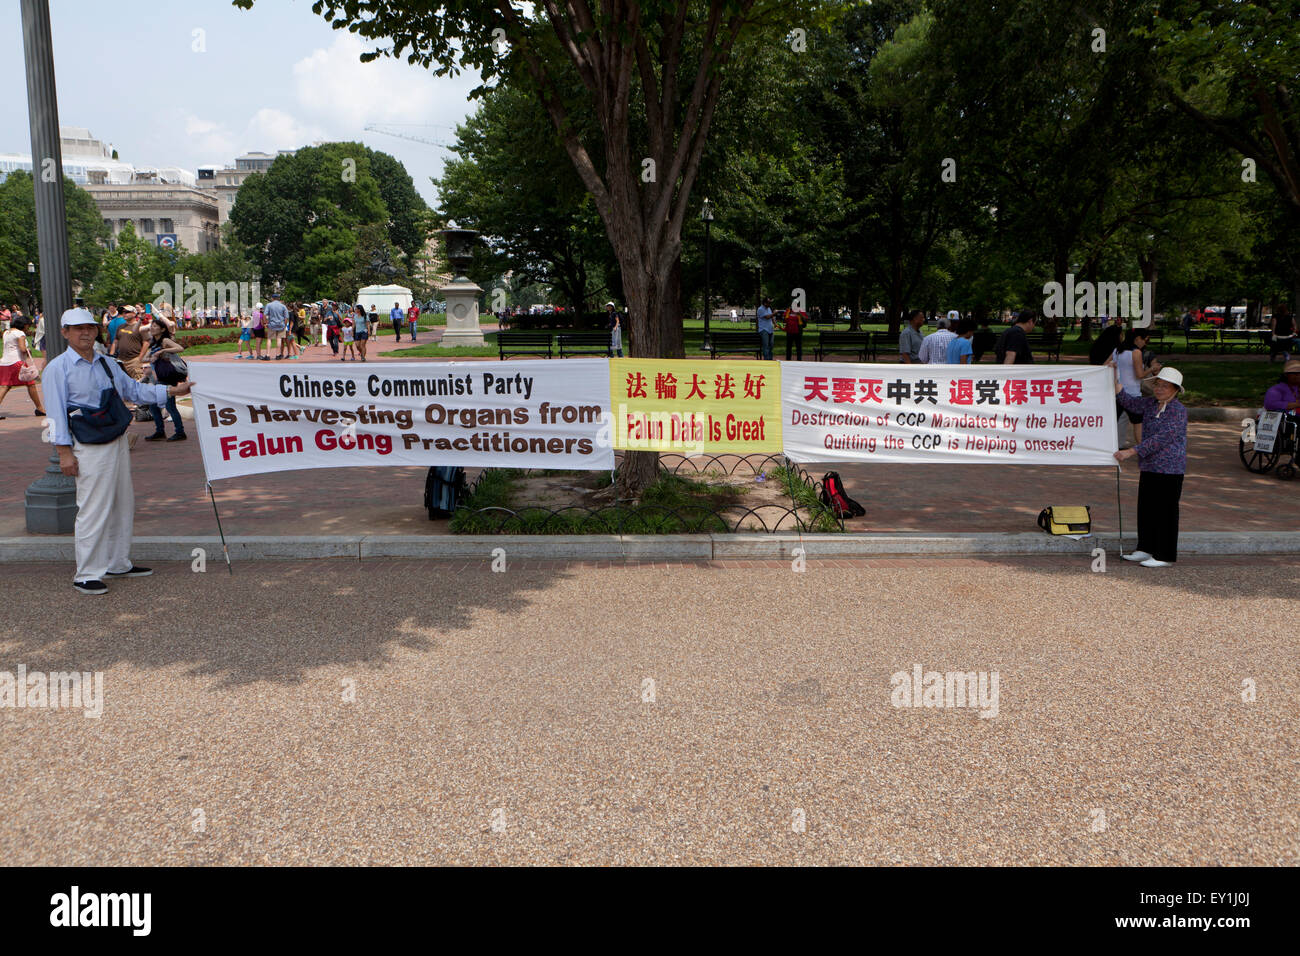 Falun Gong practitioners protesting against Chinese Communist party - Washington, DC USA Stock Photo